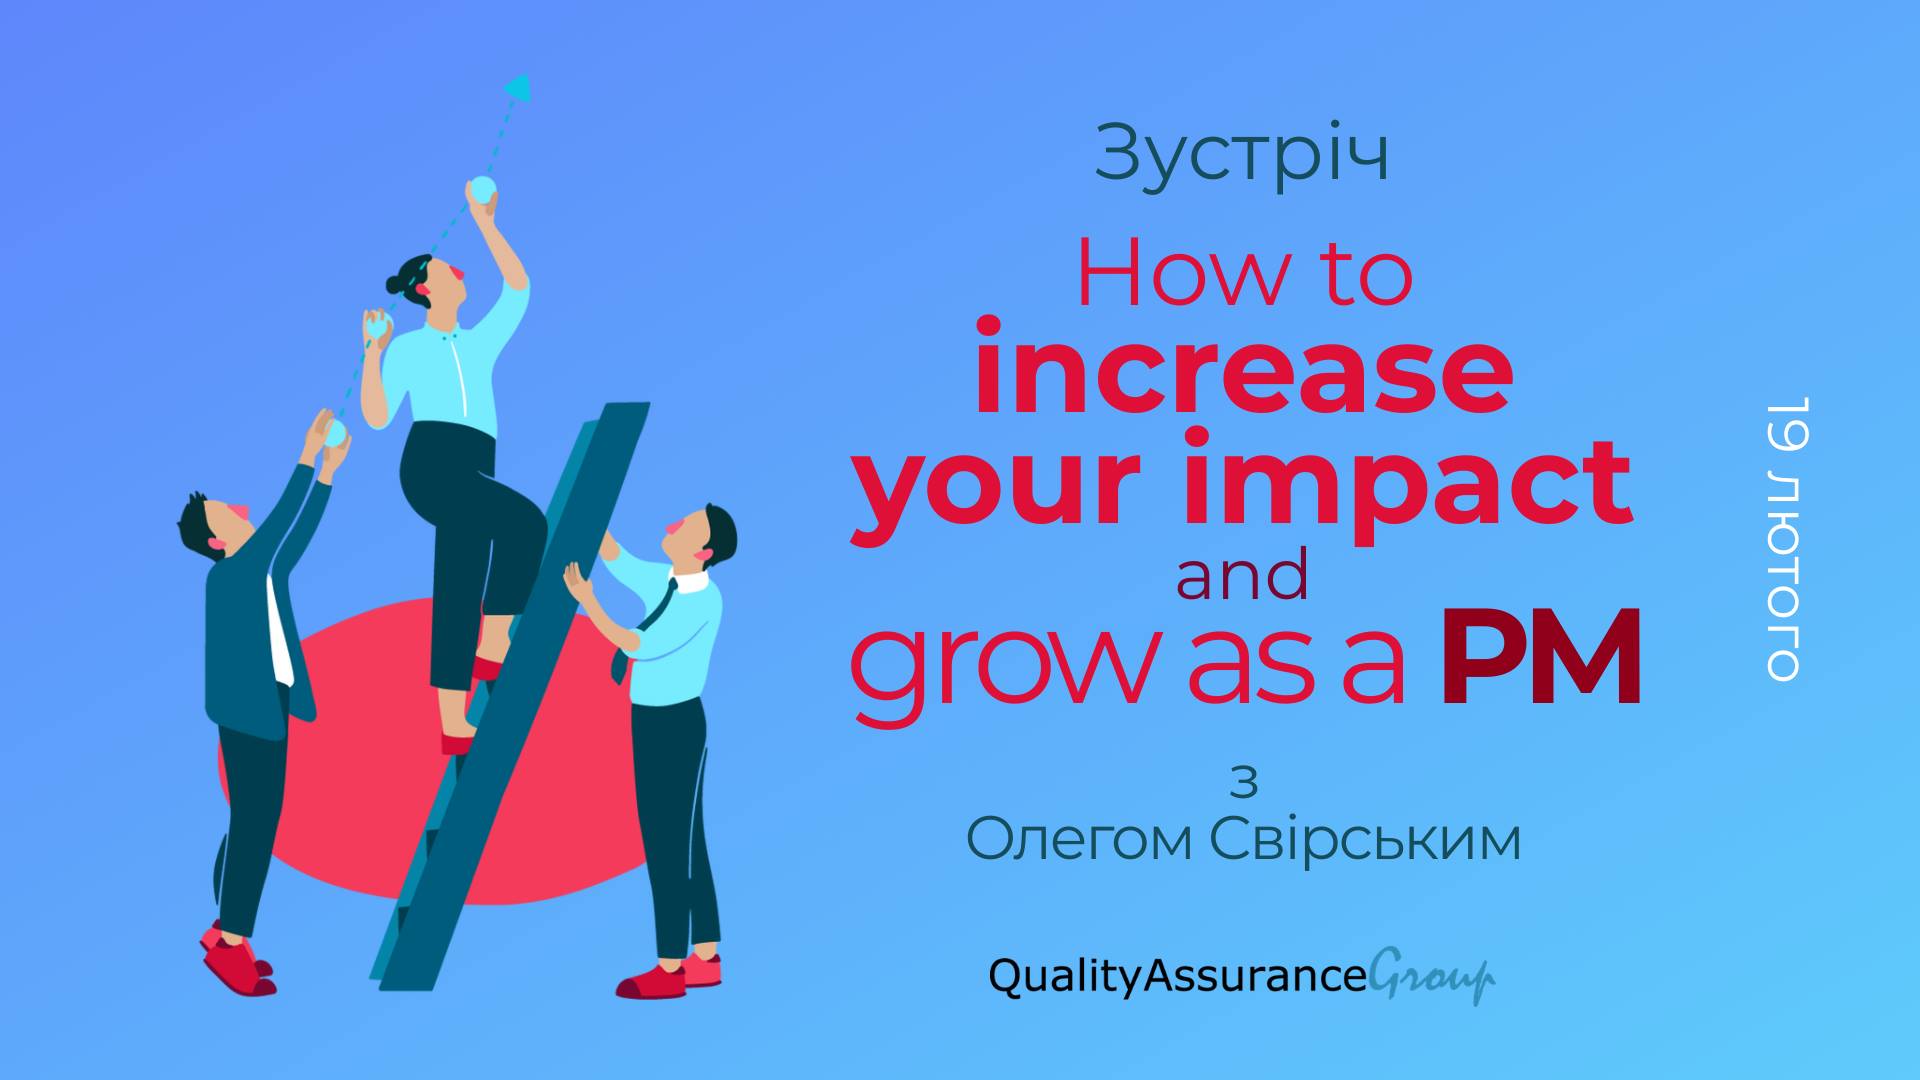 Зустріч How to increase your impact and grow as a PM